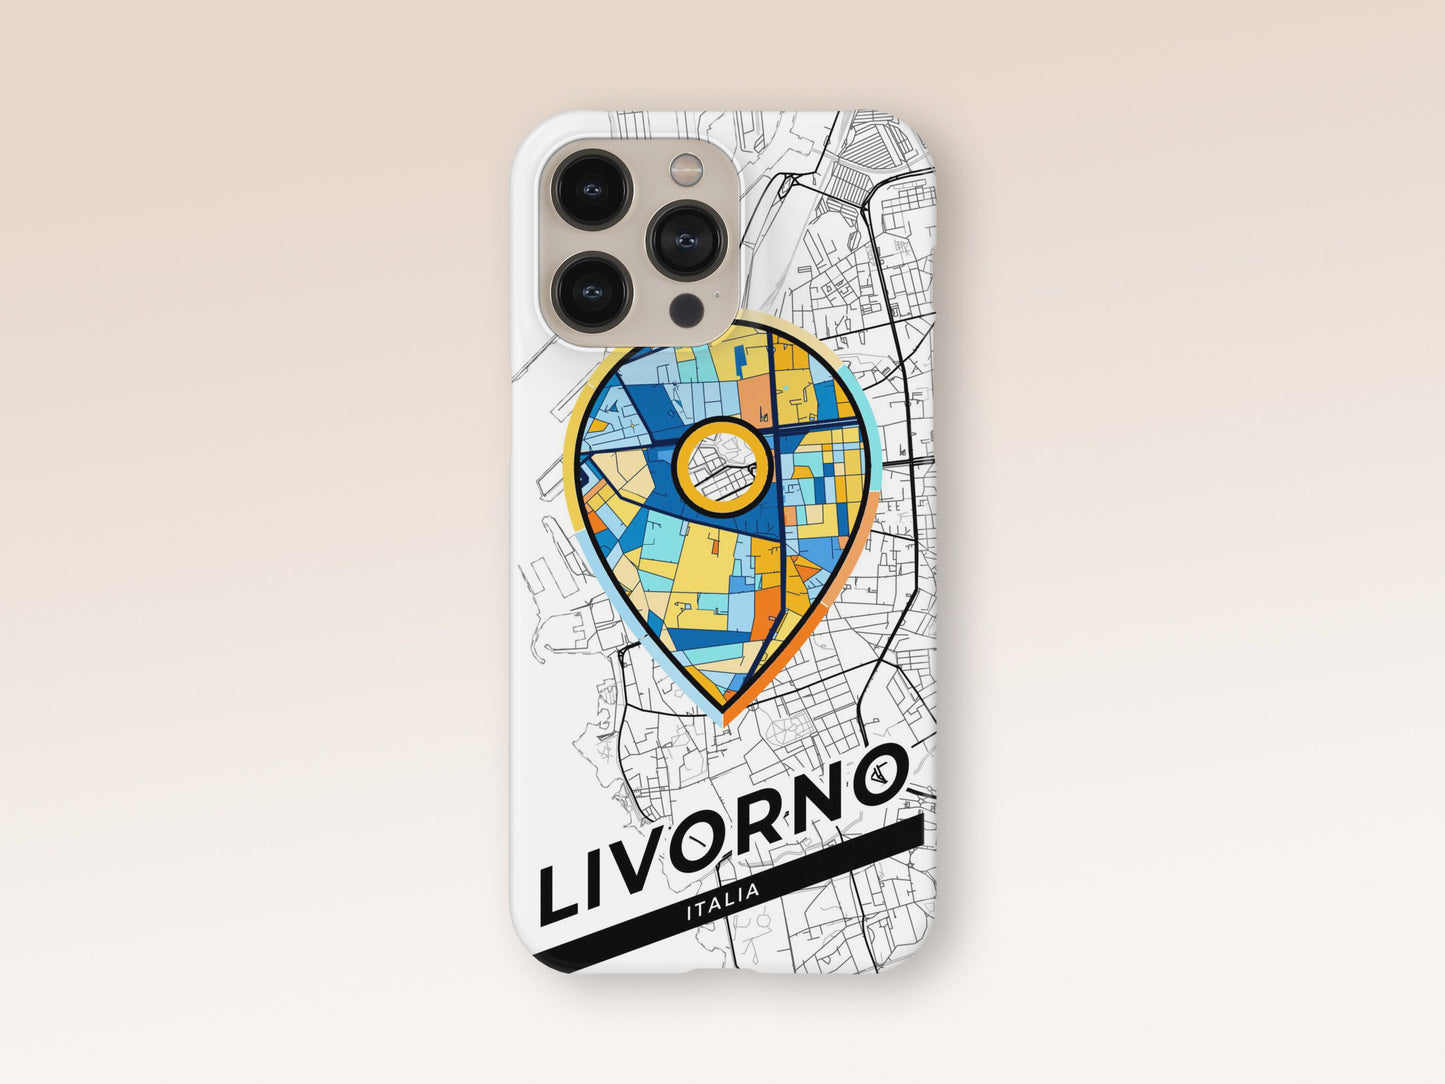 Livorno Italy slim phone case with colorful icon. Birthday, wedding or housewarming gift. Couple match cases. 1